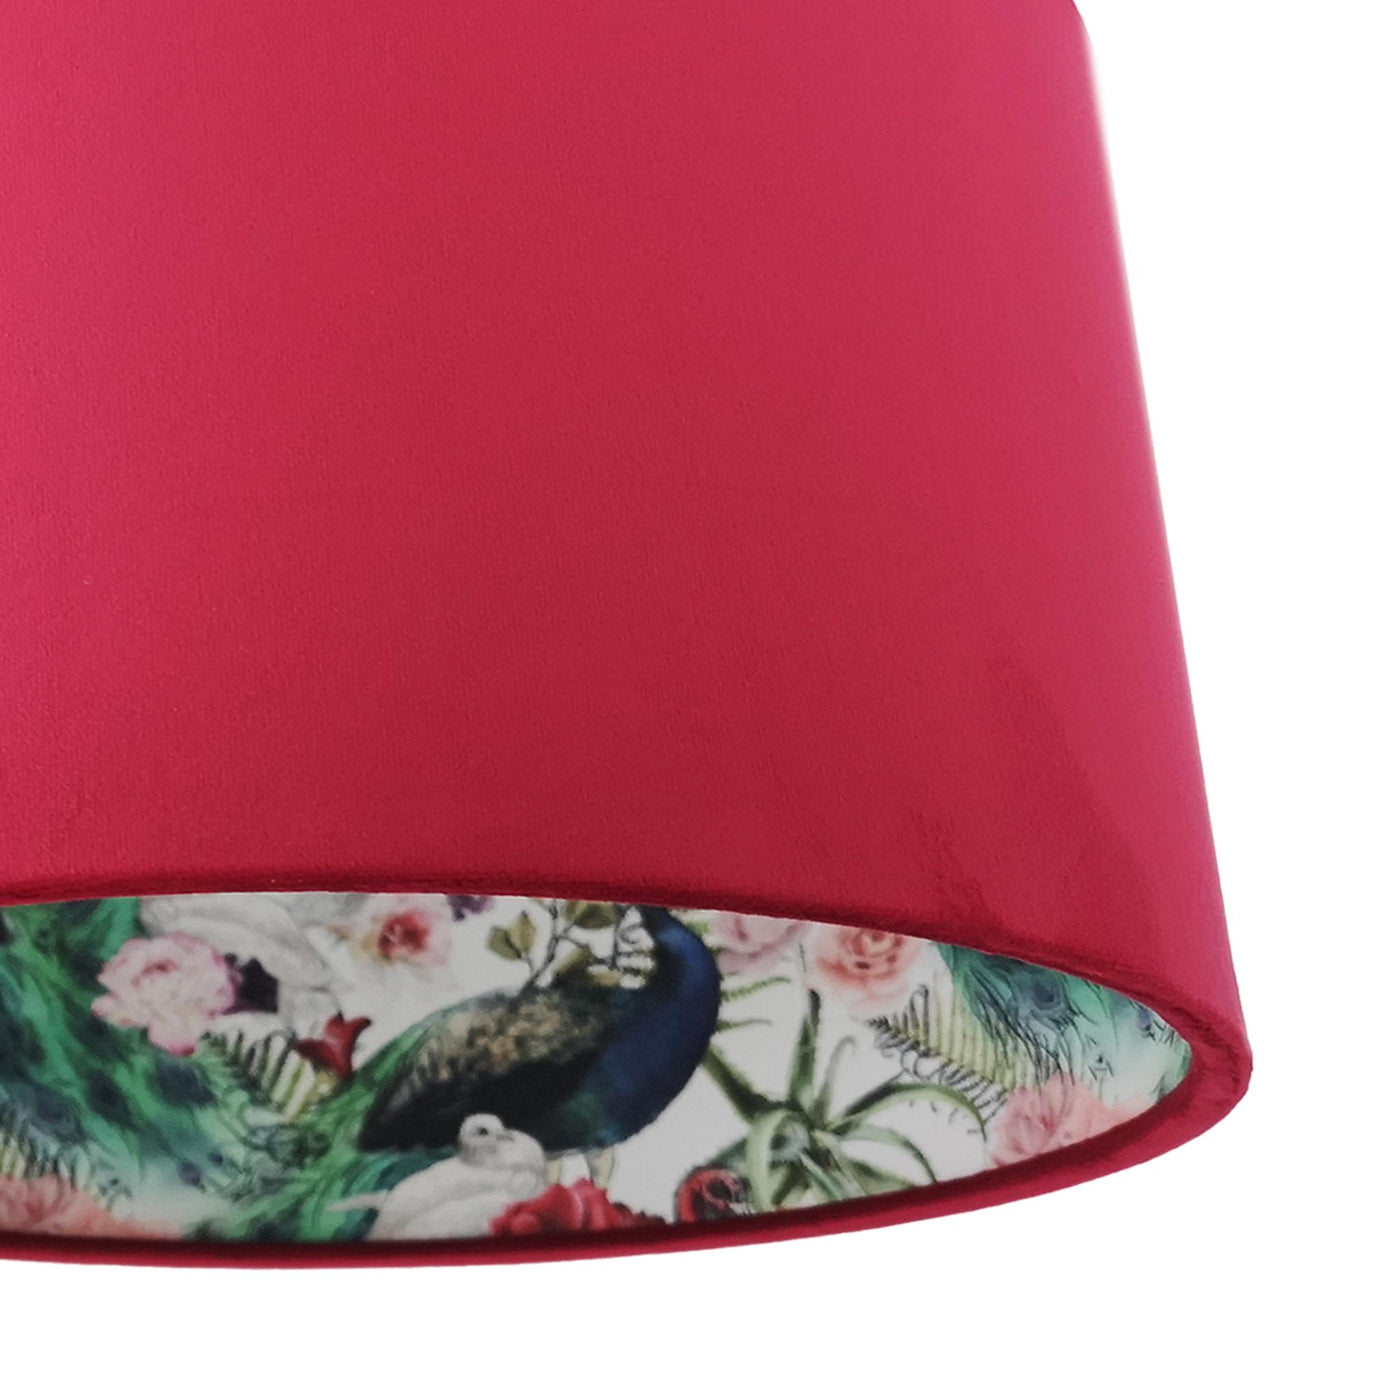 close up of the Flamingo and Peacock Feathers Light Shade in Red Claret Velvet